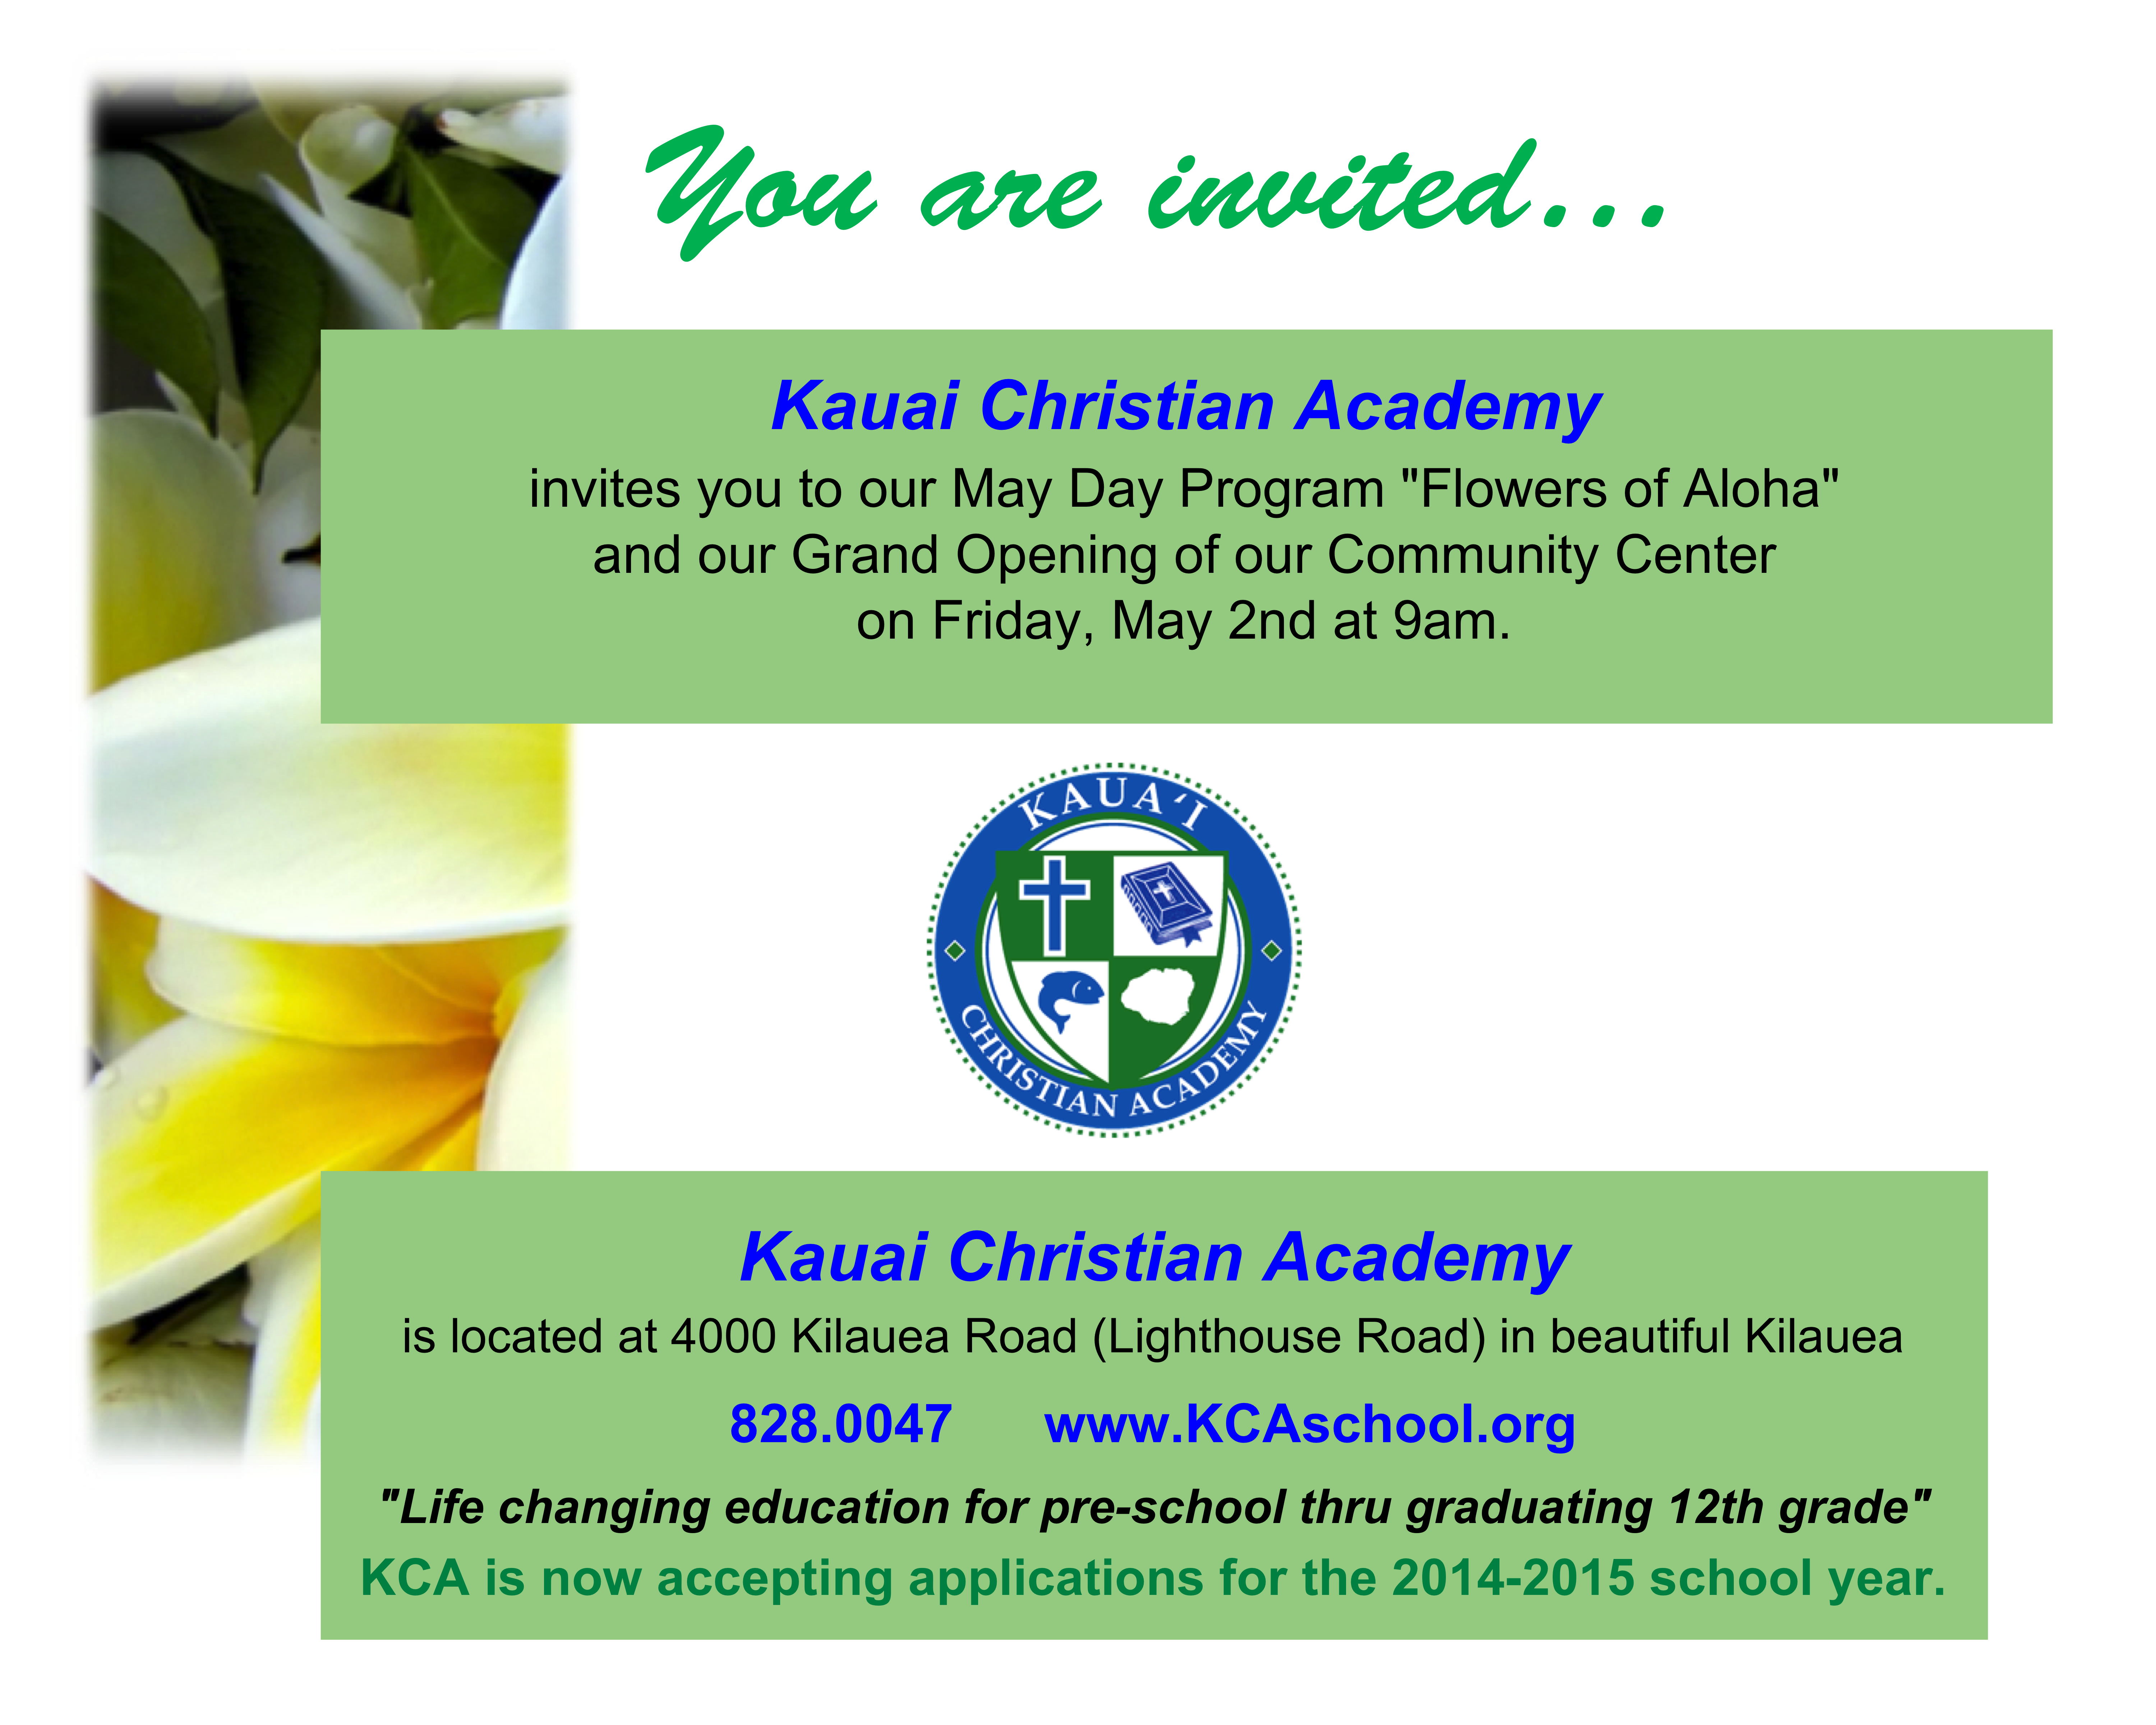 Community Center Grand Opening / Flower of Aloha May Day Program at